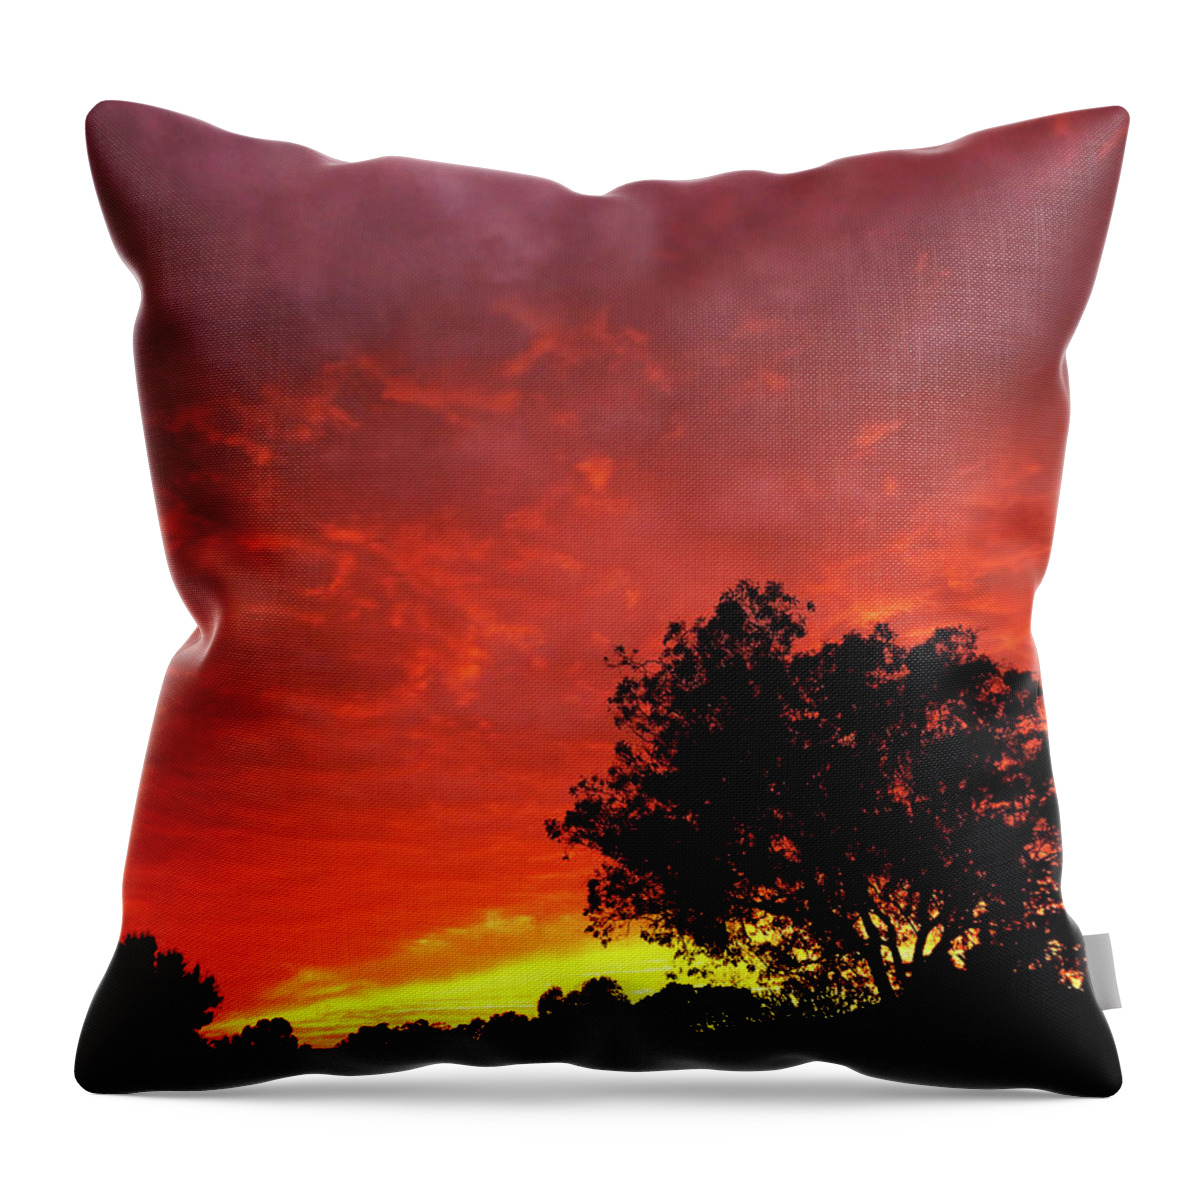 Sunset Throw Pillow featuring the photograph Southern Sunset by Mark Blauhoefer